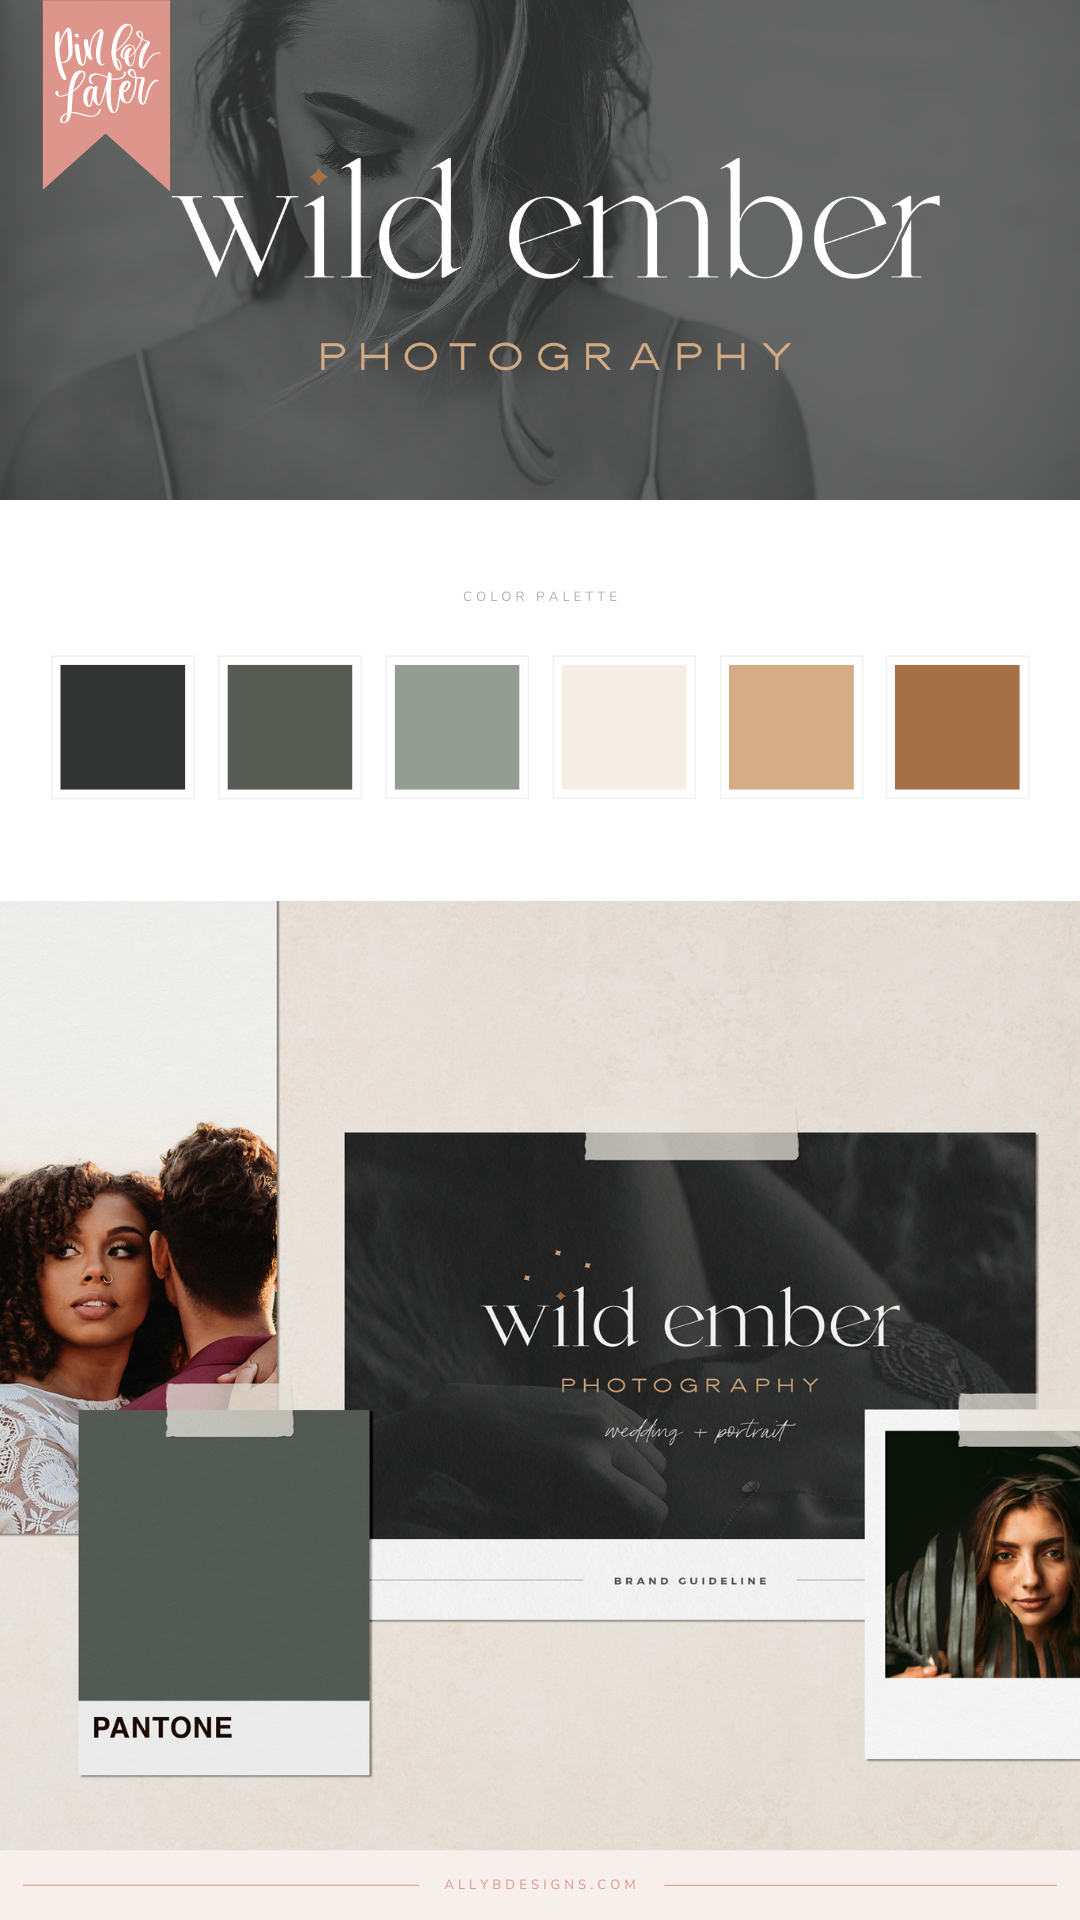 An Elopement and Wedding Photographer Brand Design: Wild Ember Photography. Branding and Website Design by Ally B Designs